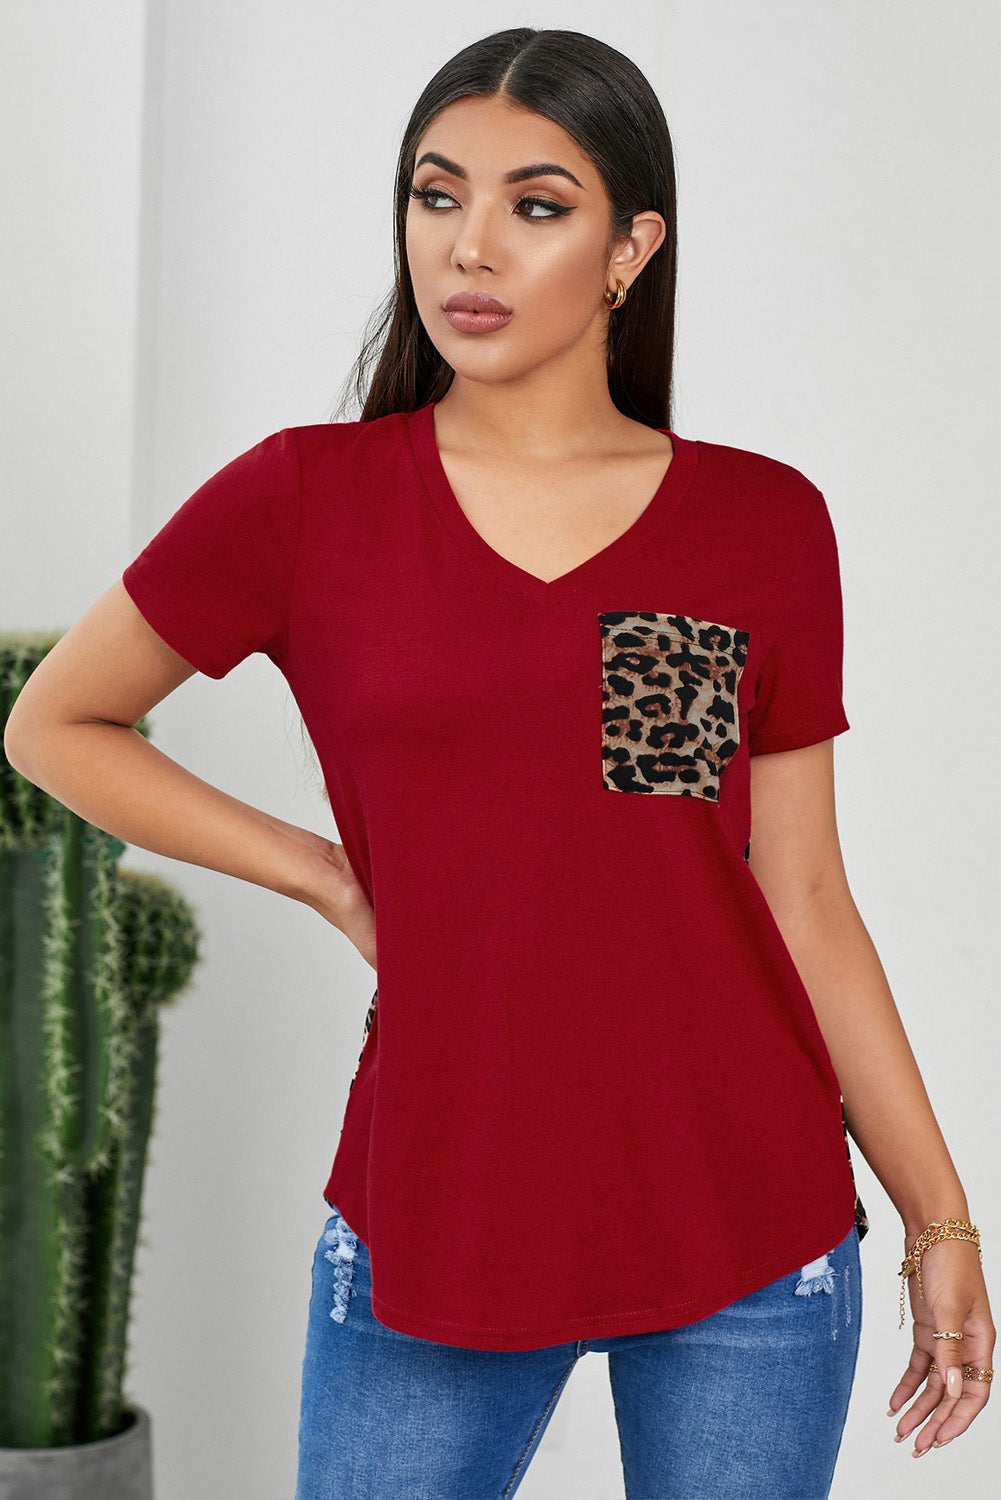 Red Leopard Printed Splicing Short Sleeve T-Shirt